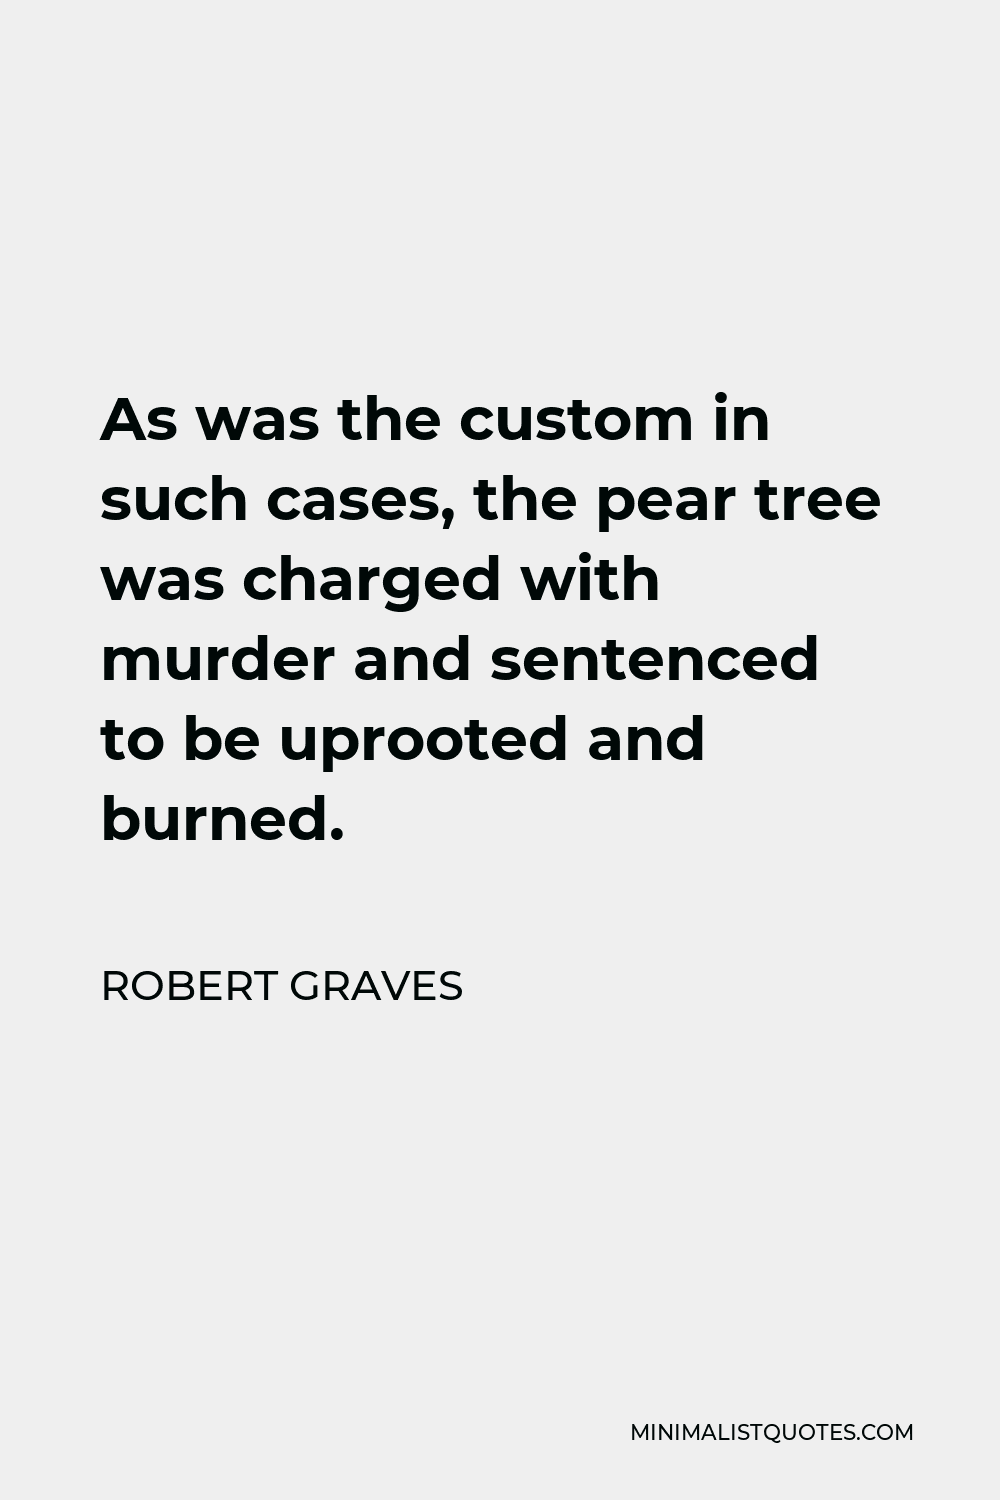 Robert Graves Quote - As was the custom in such cases, the pear tree was charged with murder and sentenced to be uprooted and burned.